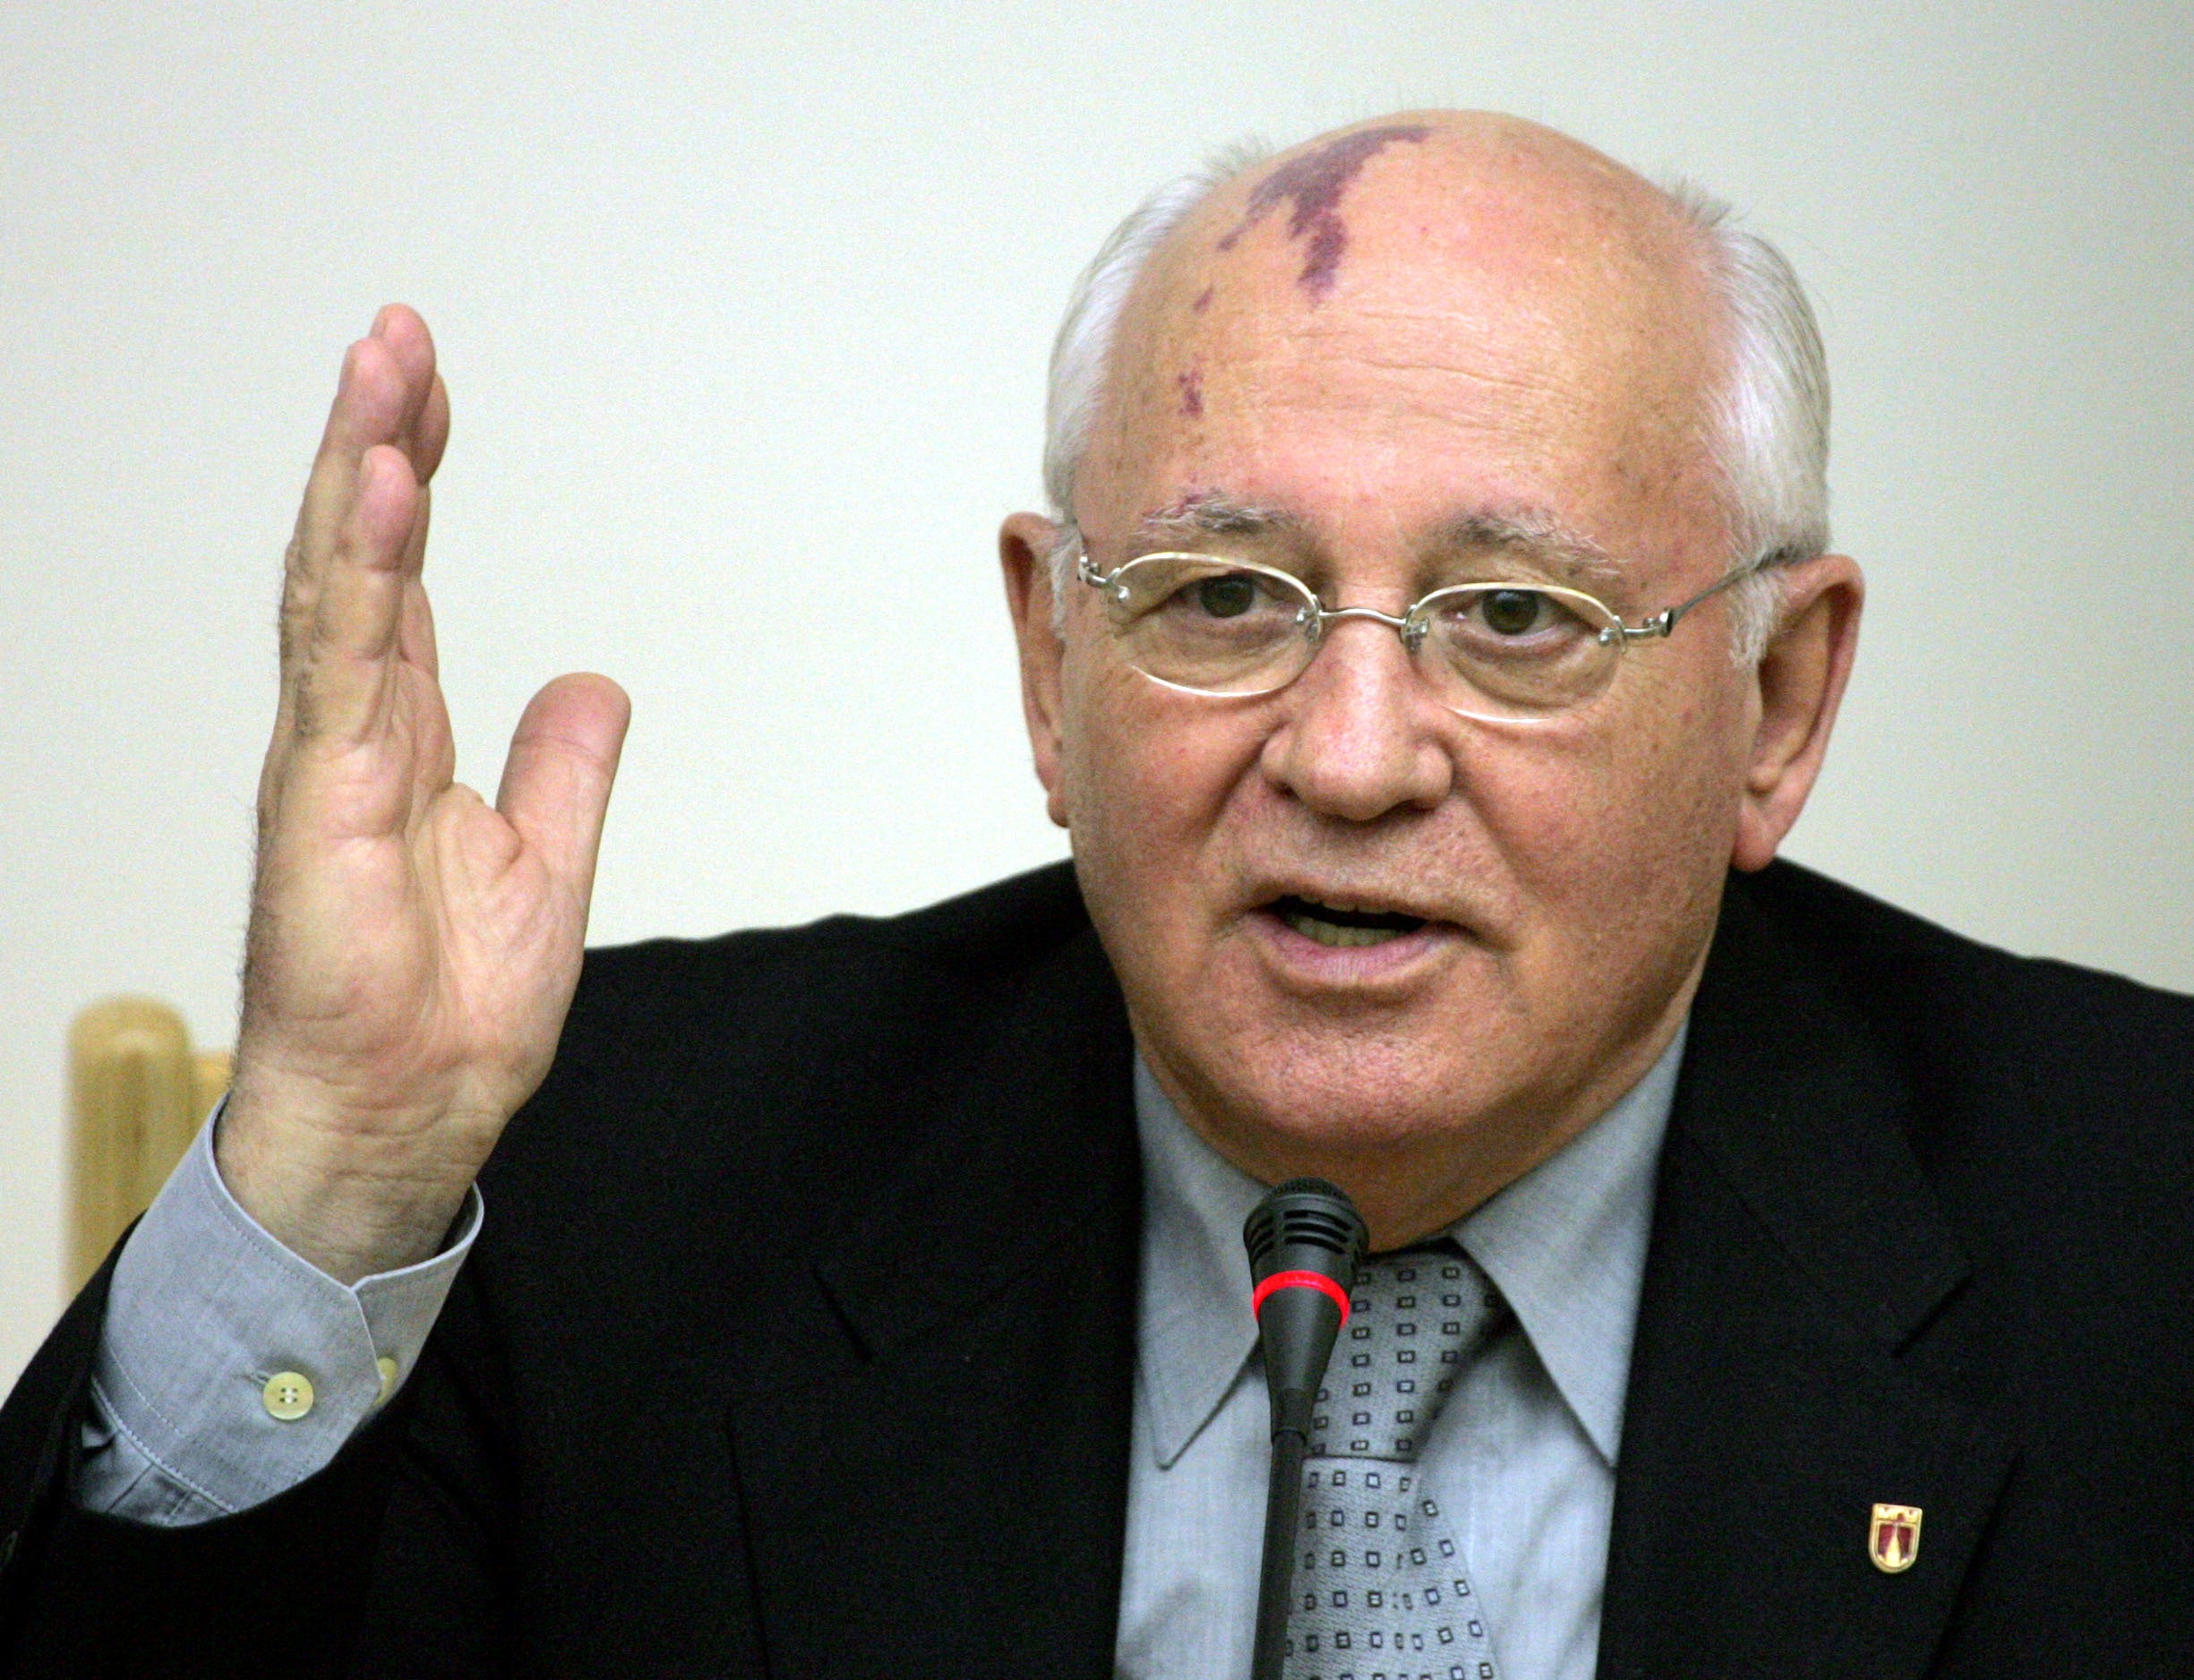 Mikhail Gorbachev did it by mistake, because he was trying to reform the Soviet Union – not destroy it